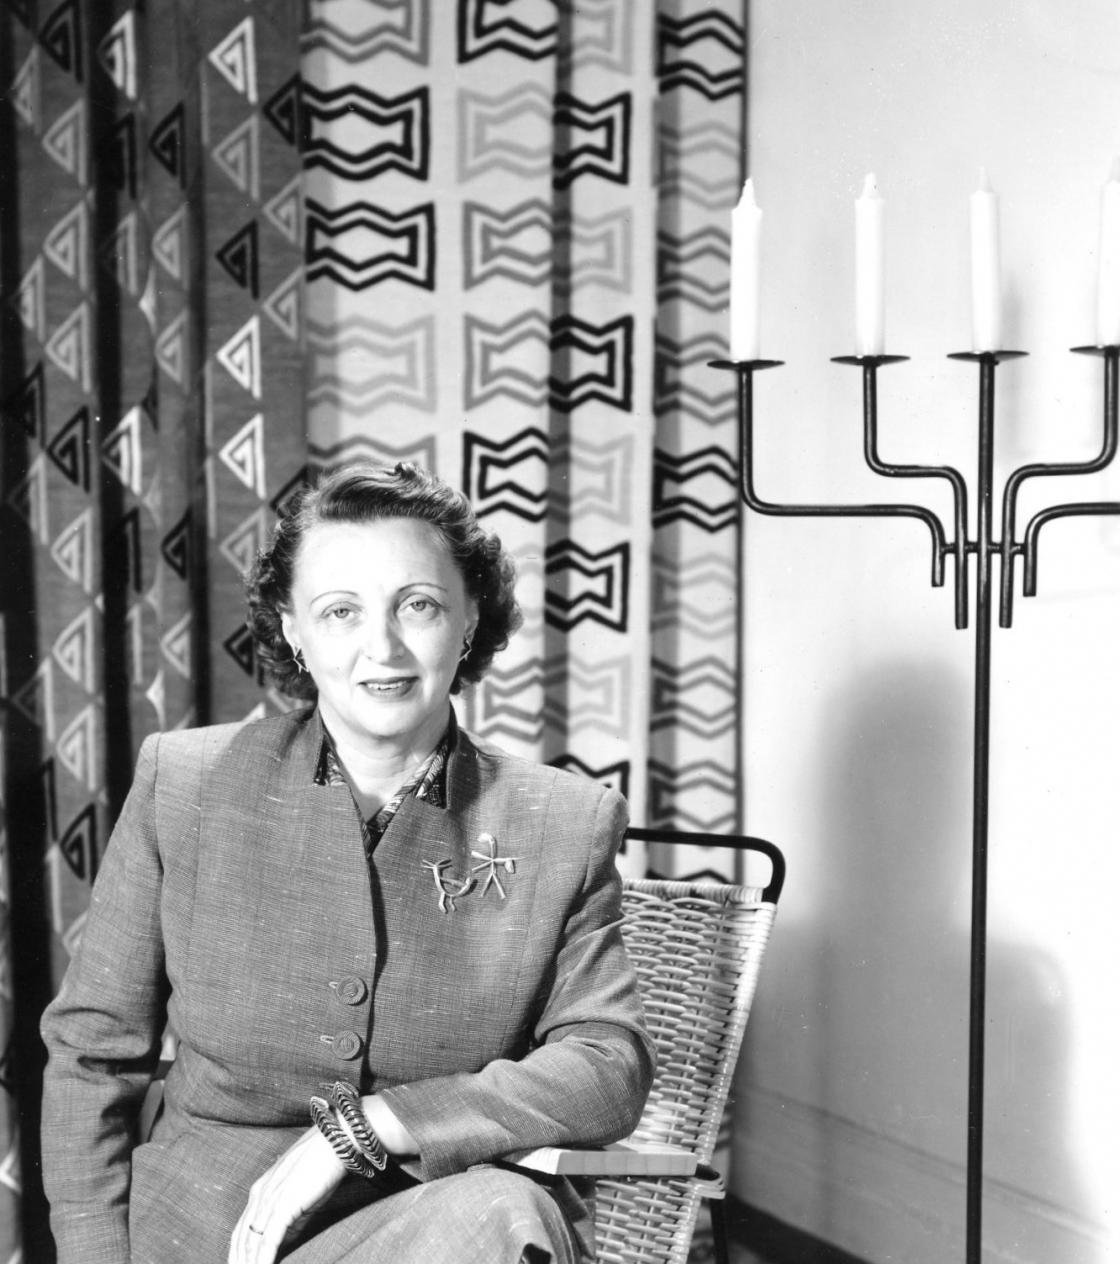 Photograph of Pipsan Saarinen Swanson in front of drapes and a candelabra she designed.